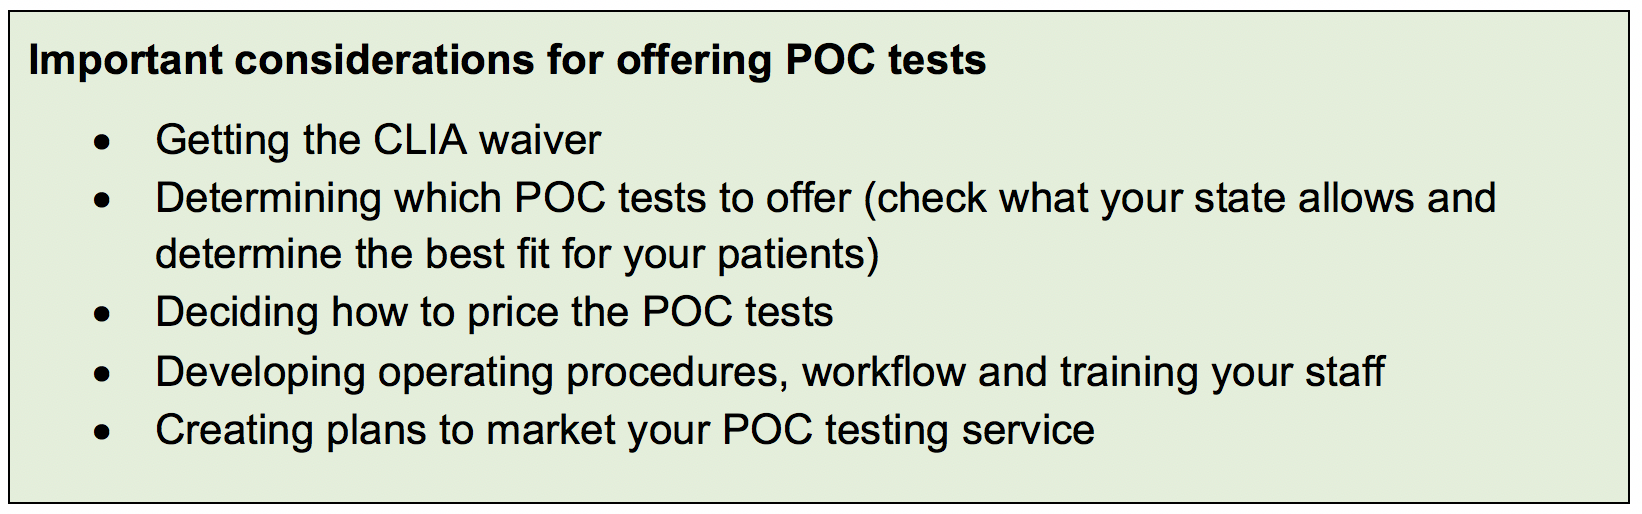 important-considerations-for-poc-tests